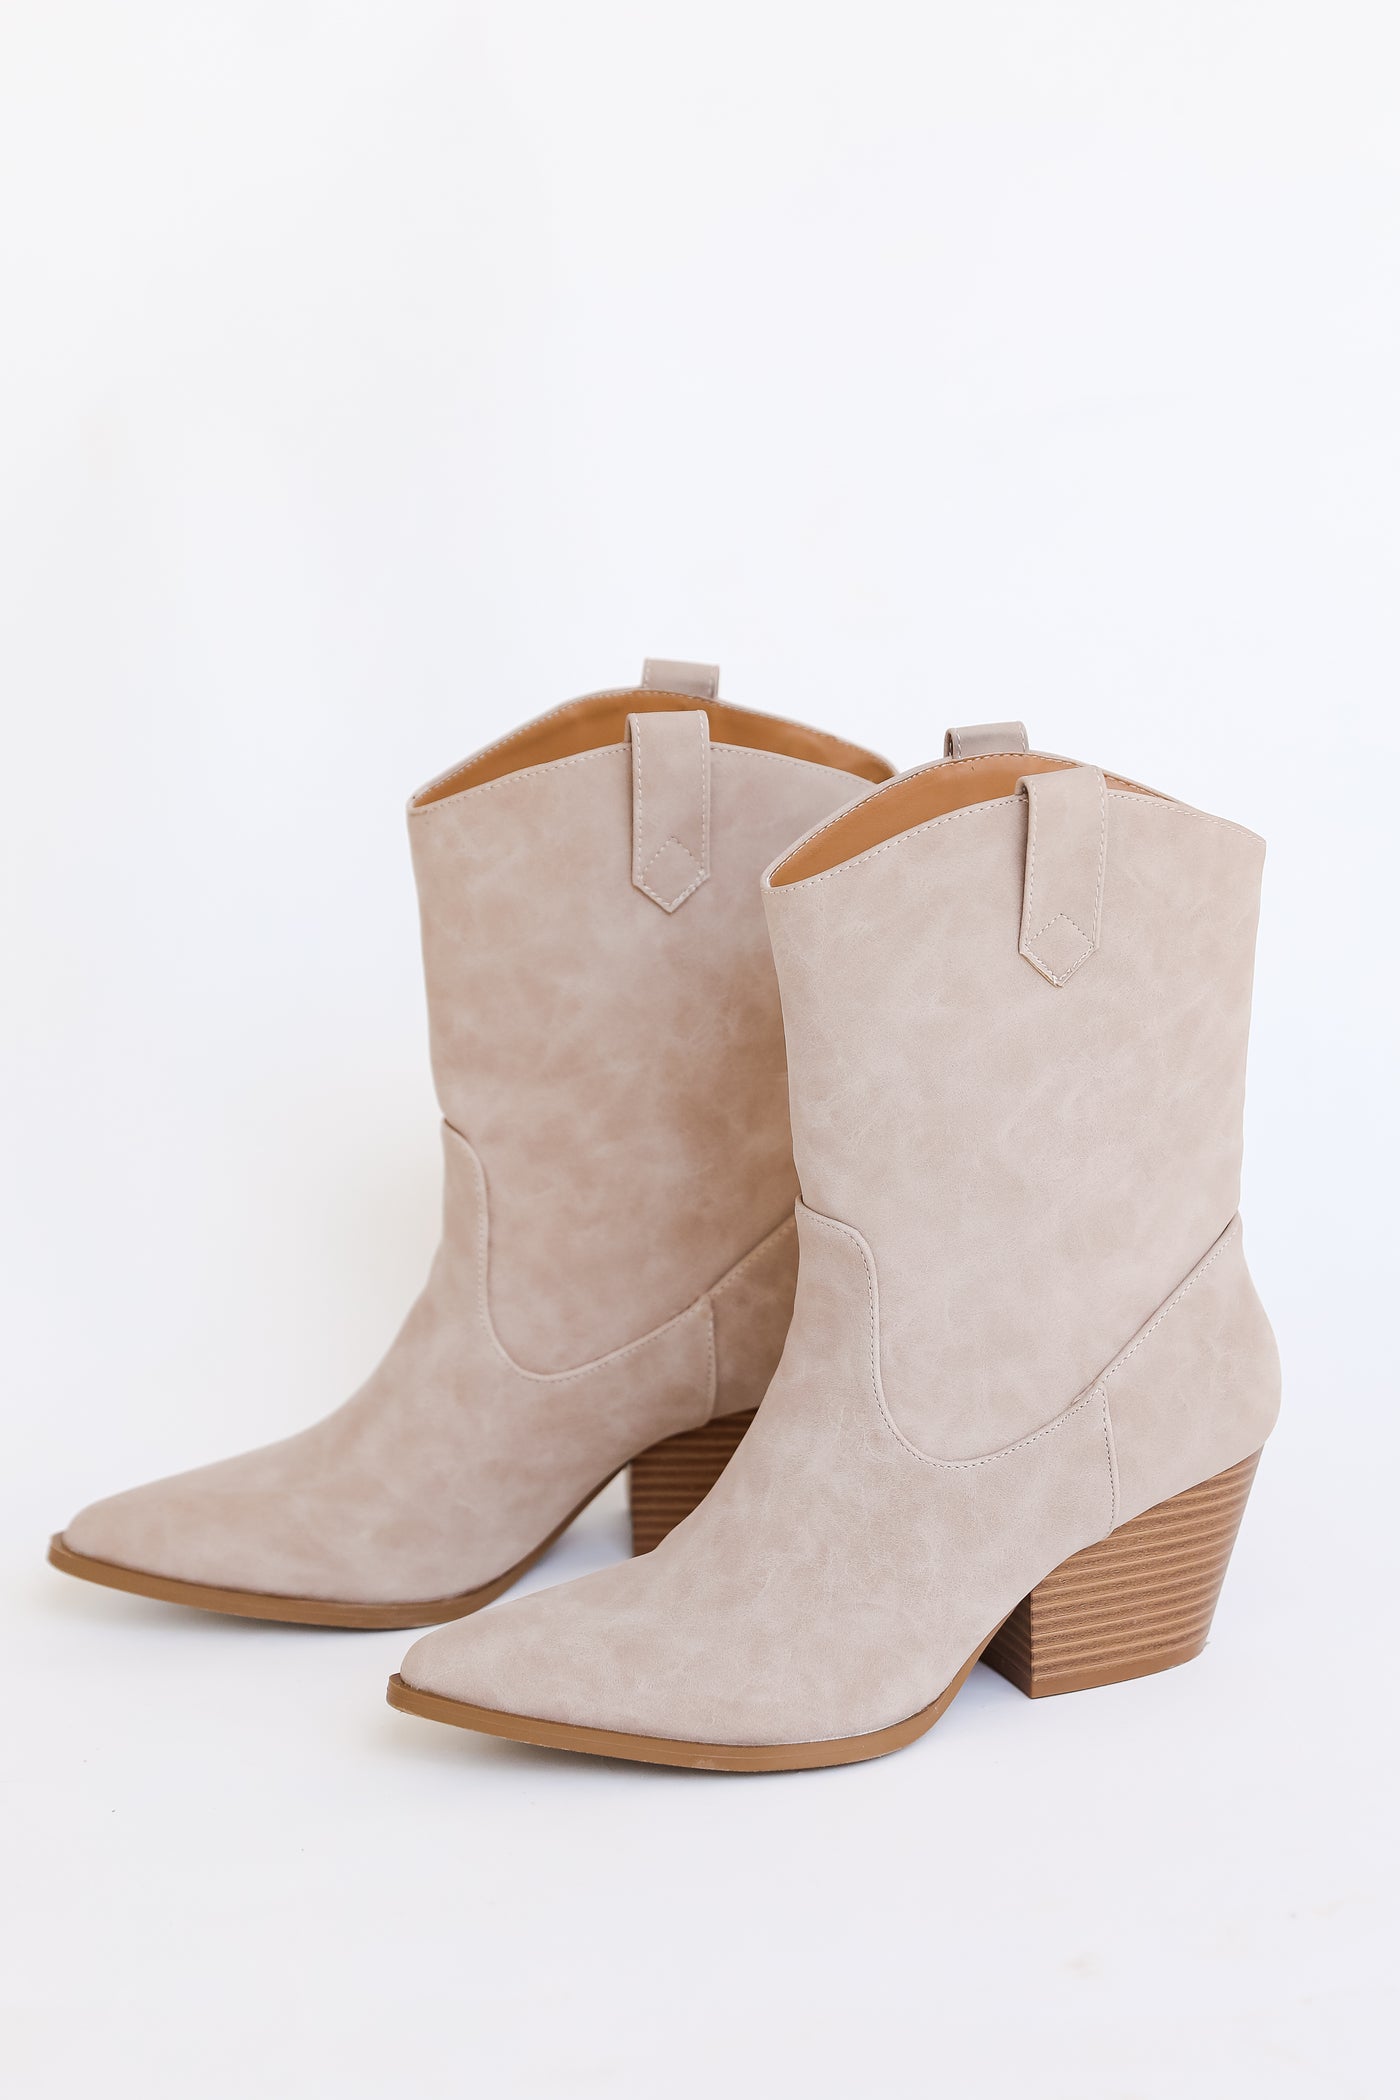 taupe western booties